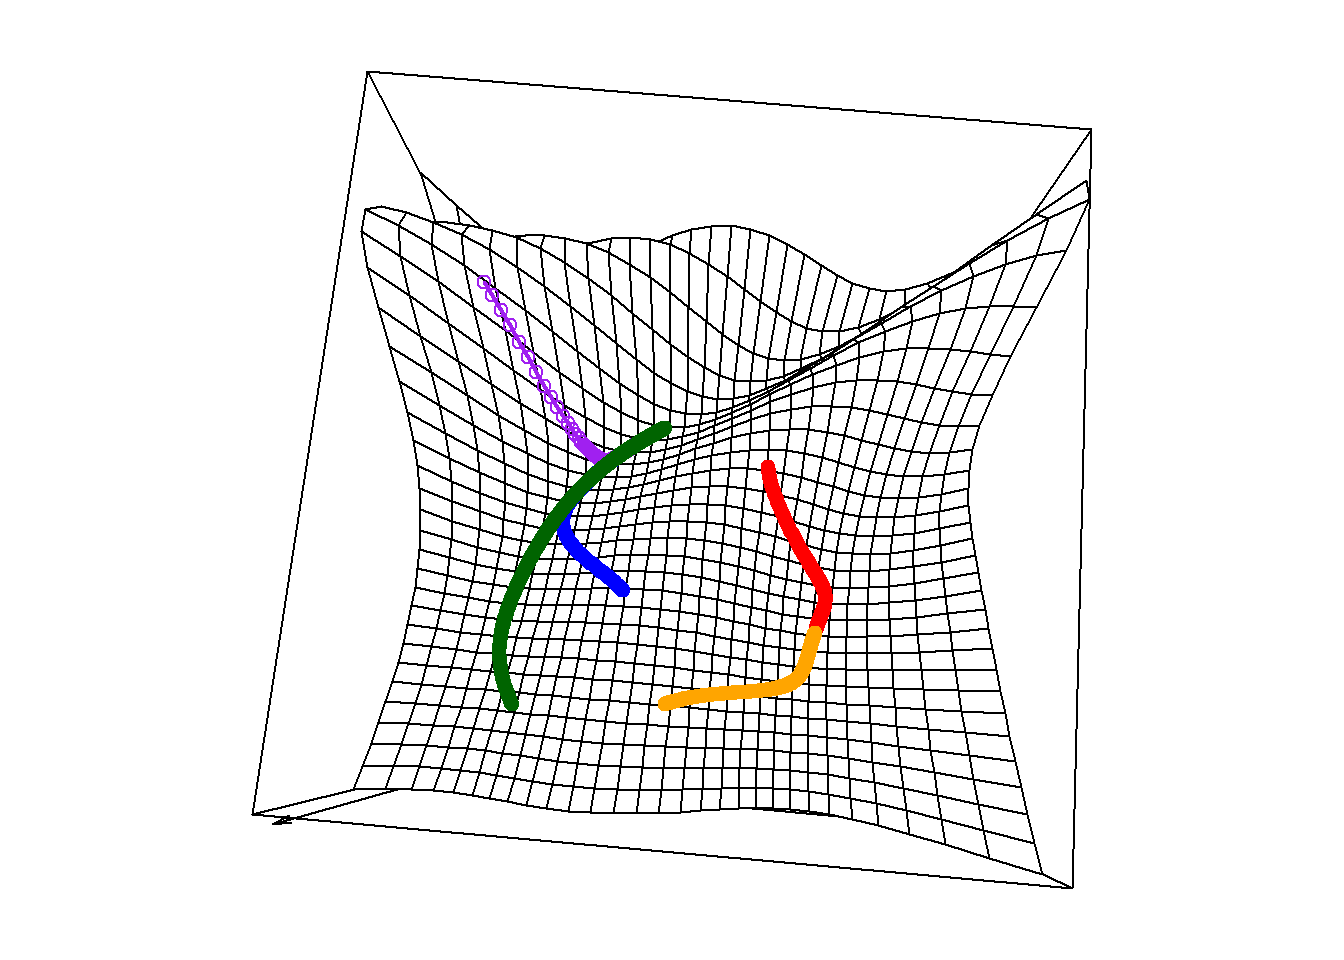 A downwards perspective of a surface plot with multiple minima plotted on a square domain with search paths following several points and two local minima.